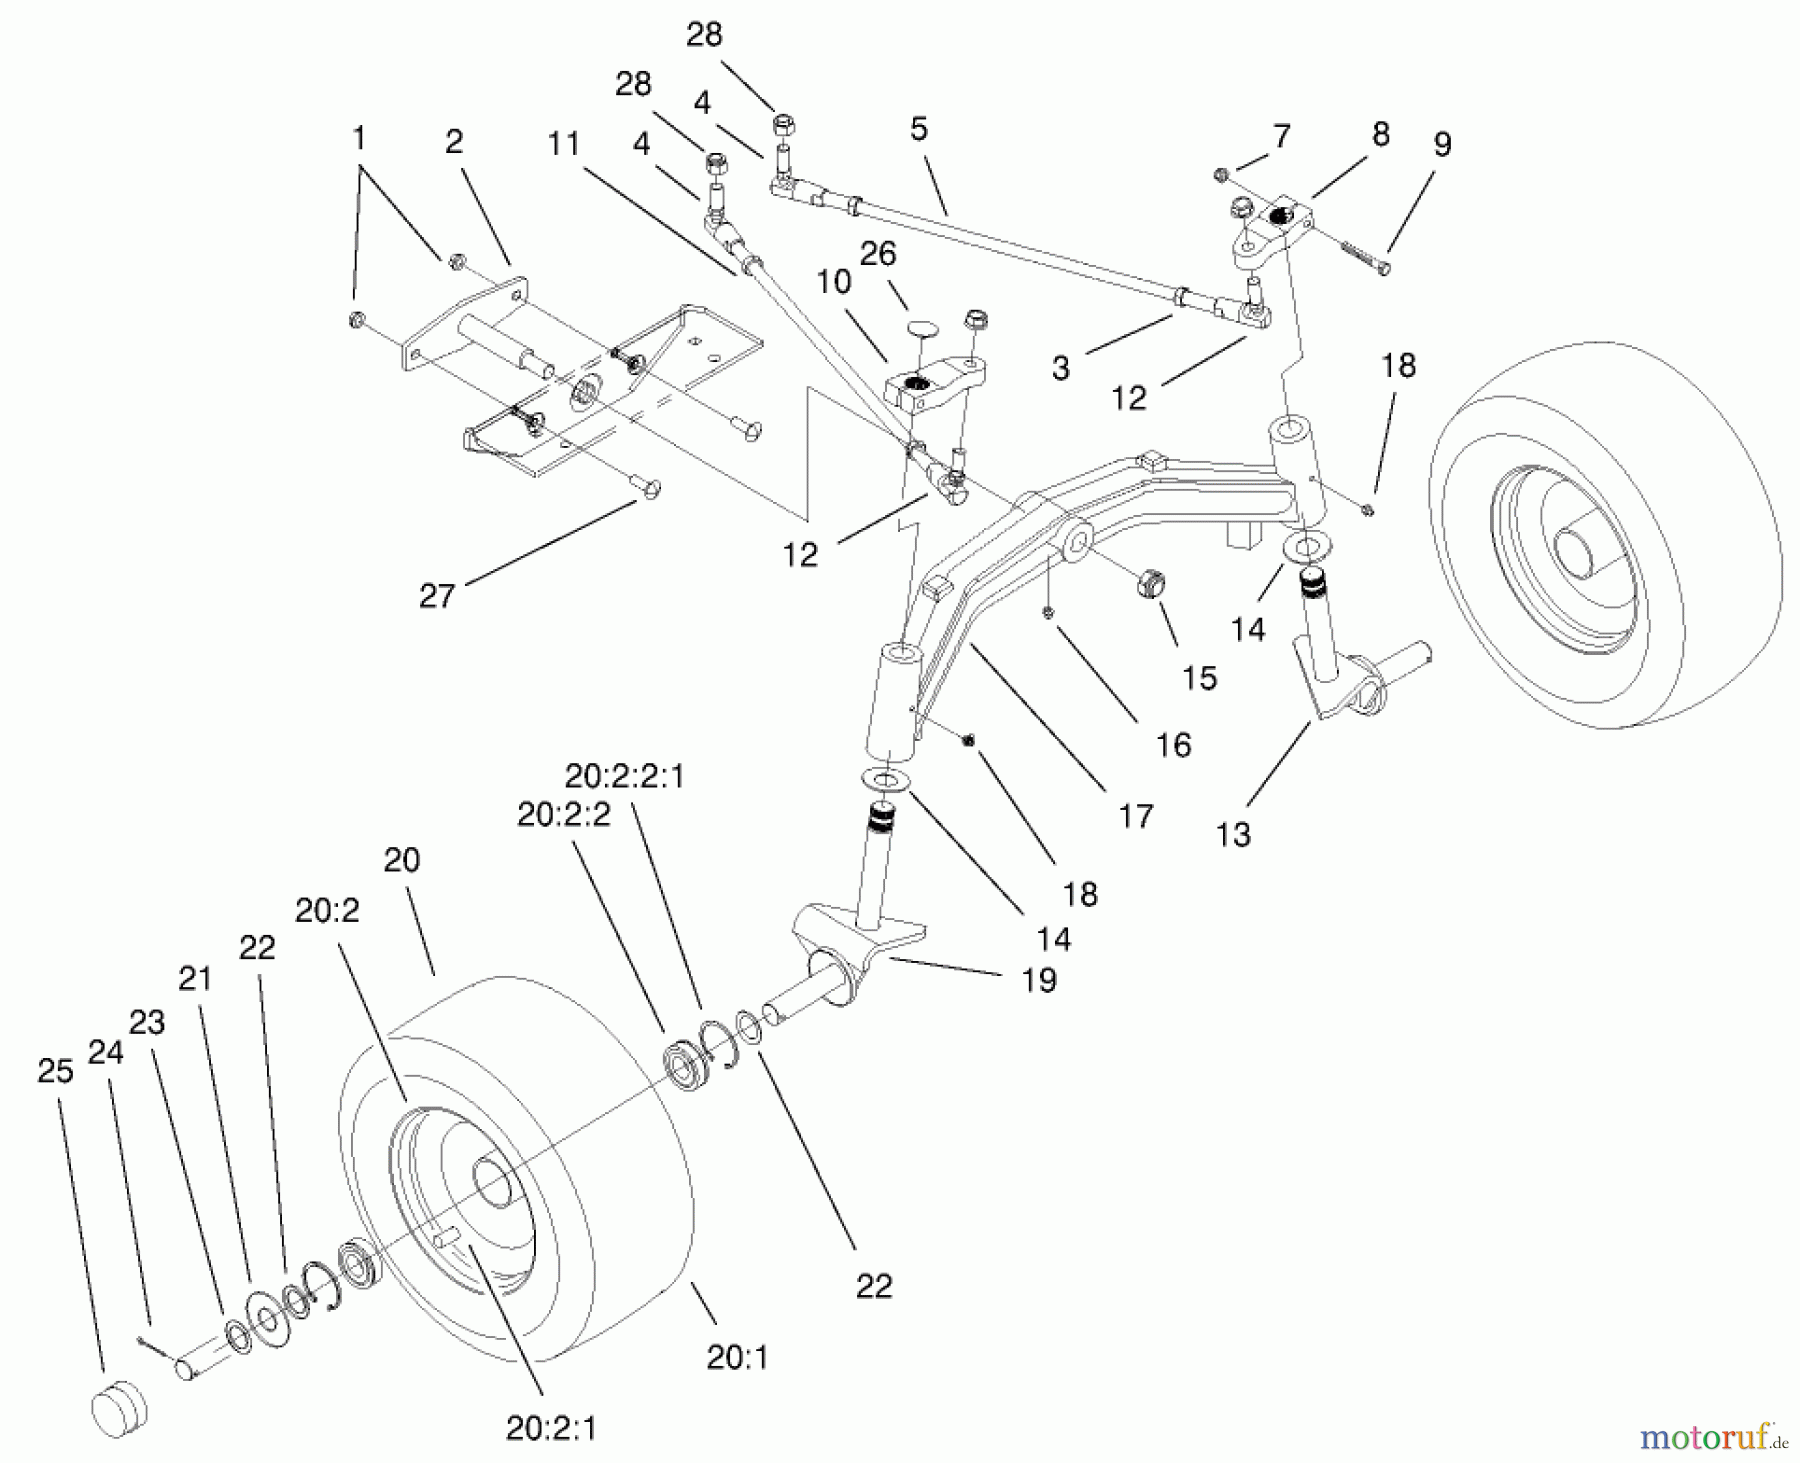  Toro Neu Mowers, Lawn & Garden Tractor Seite 1 73590 (523Dxi) - Toro 523Dxi Garden Tractor, 2000 (200000001-200999999) TIE RODS, SPINDLE, & FRONT AXLE ASSEMBLY